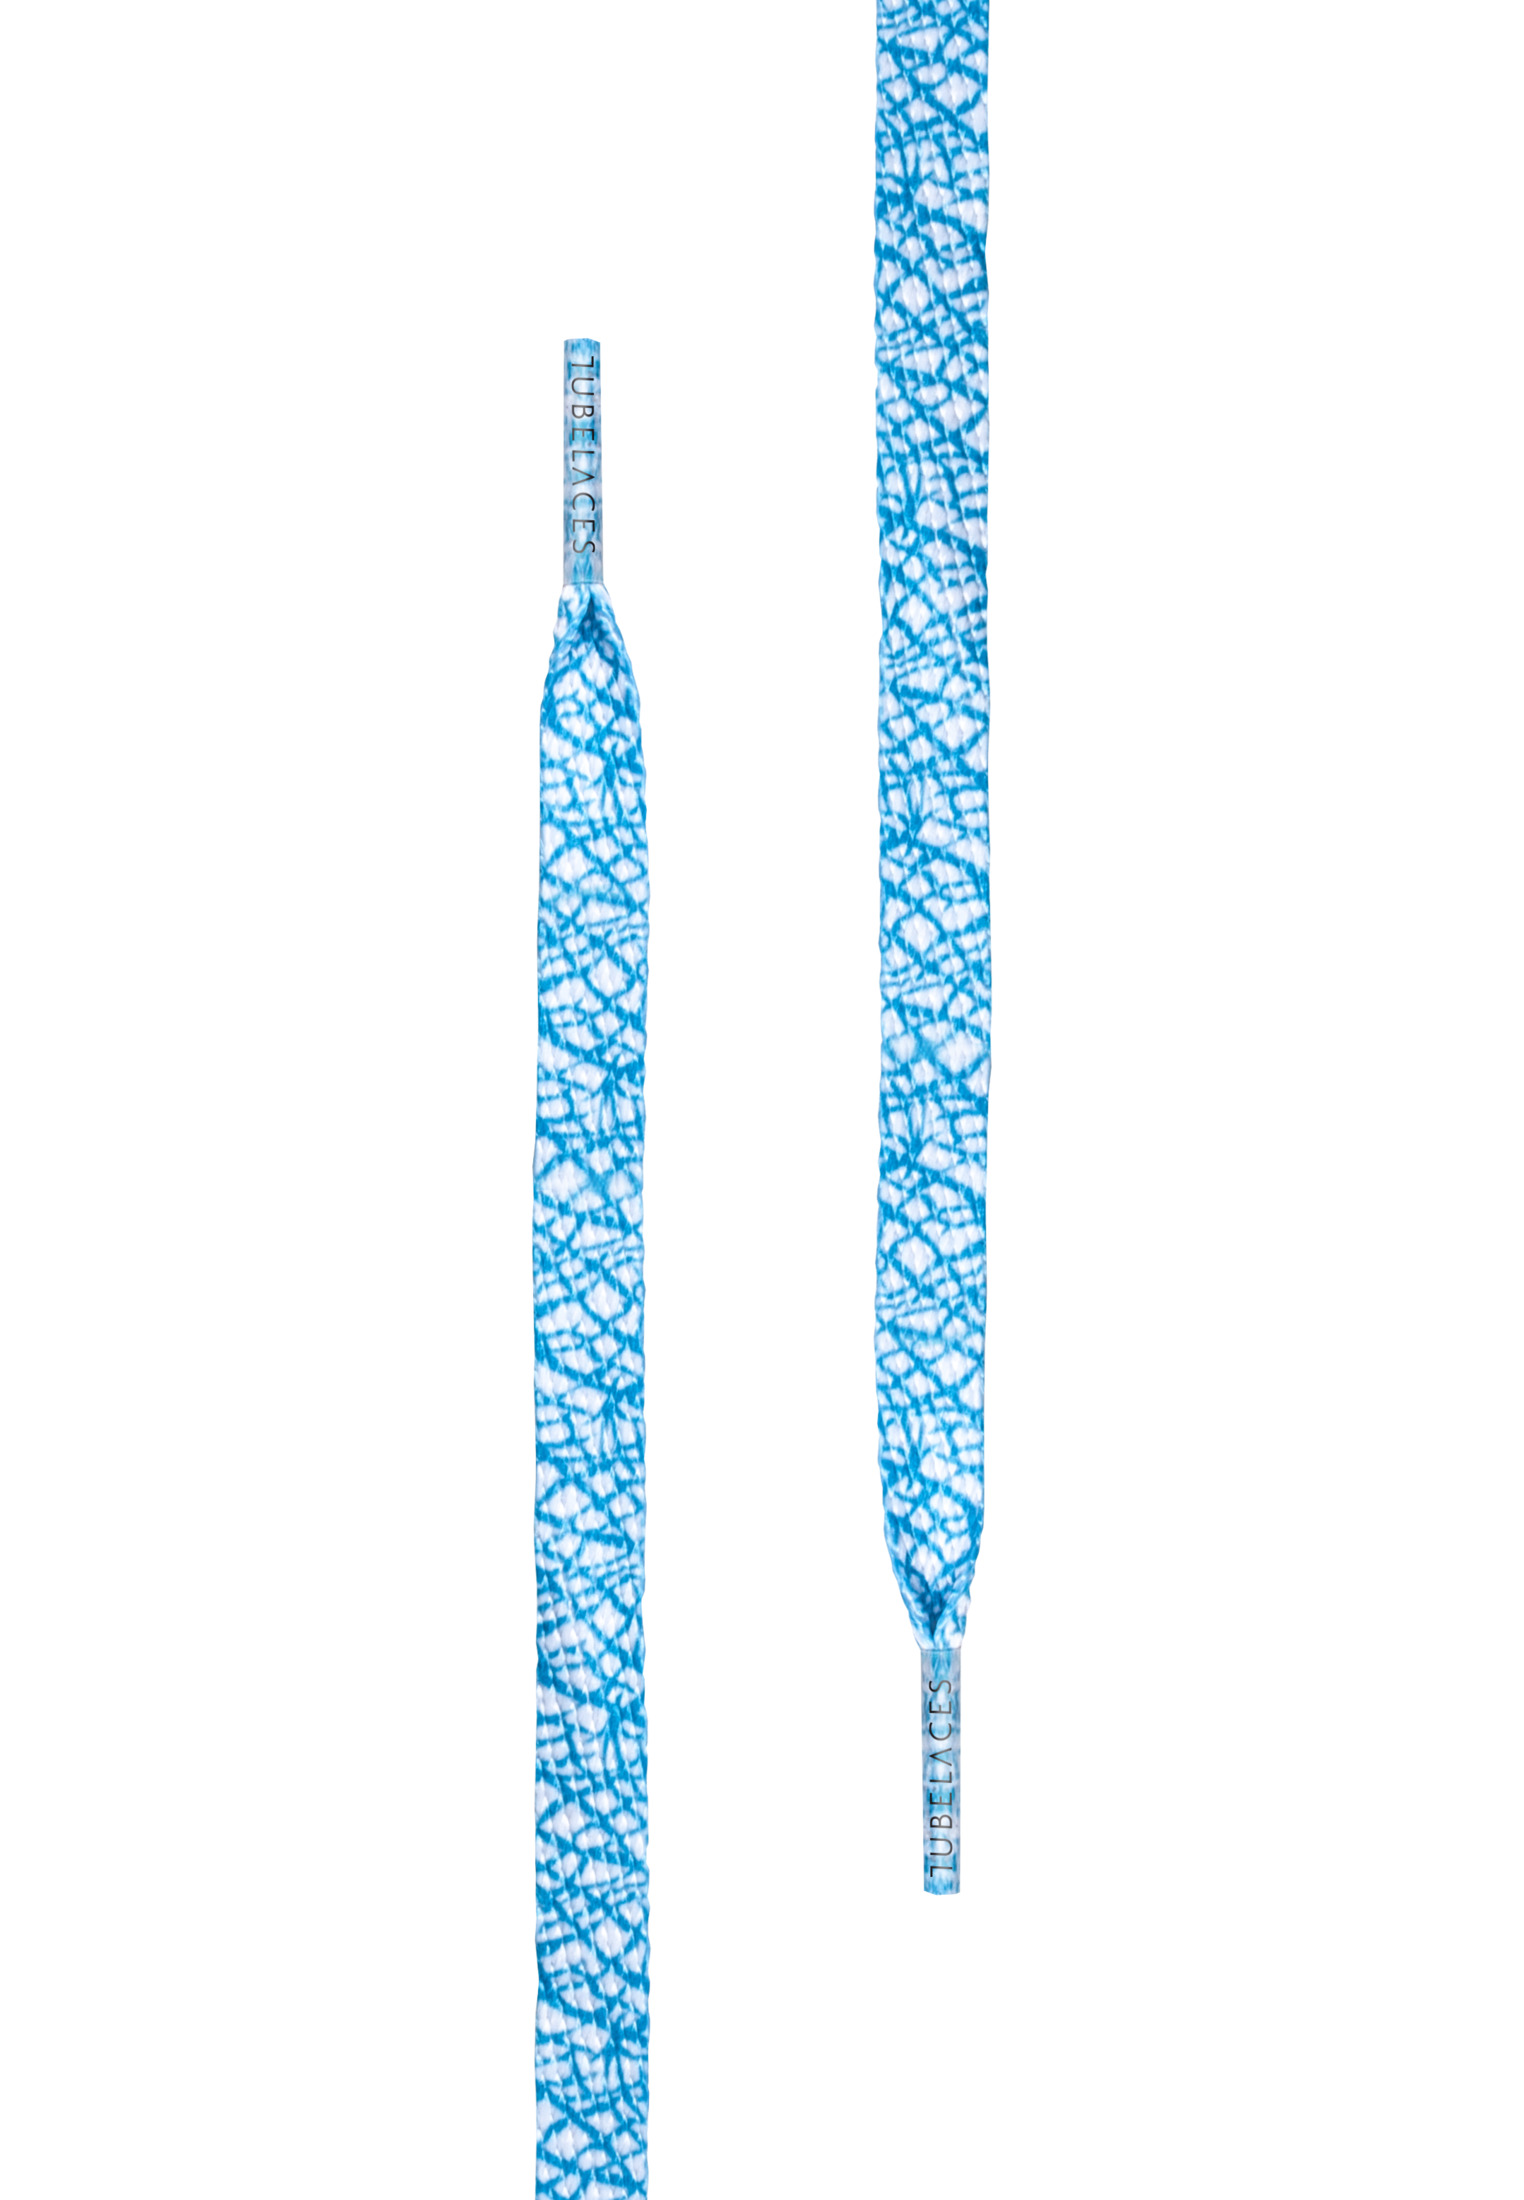 Laces Tubelaces Special Flat in Farbe Elephant blue/white